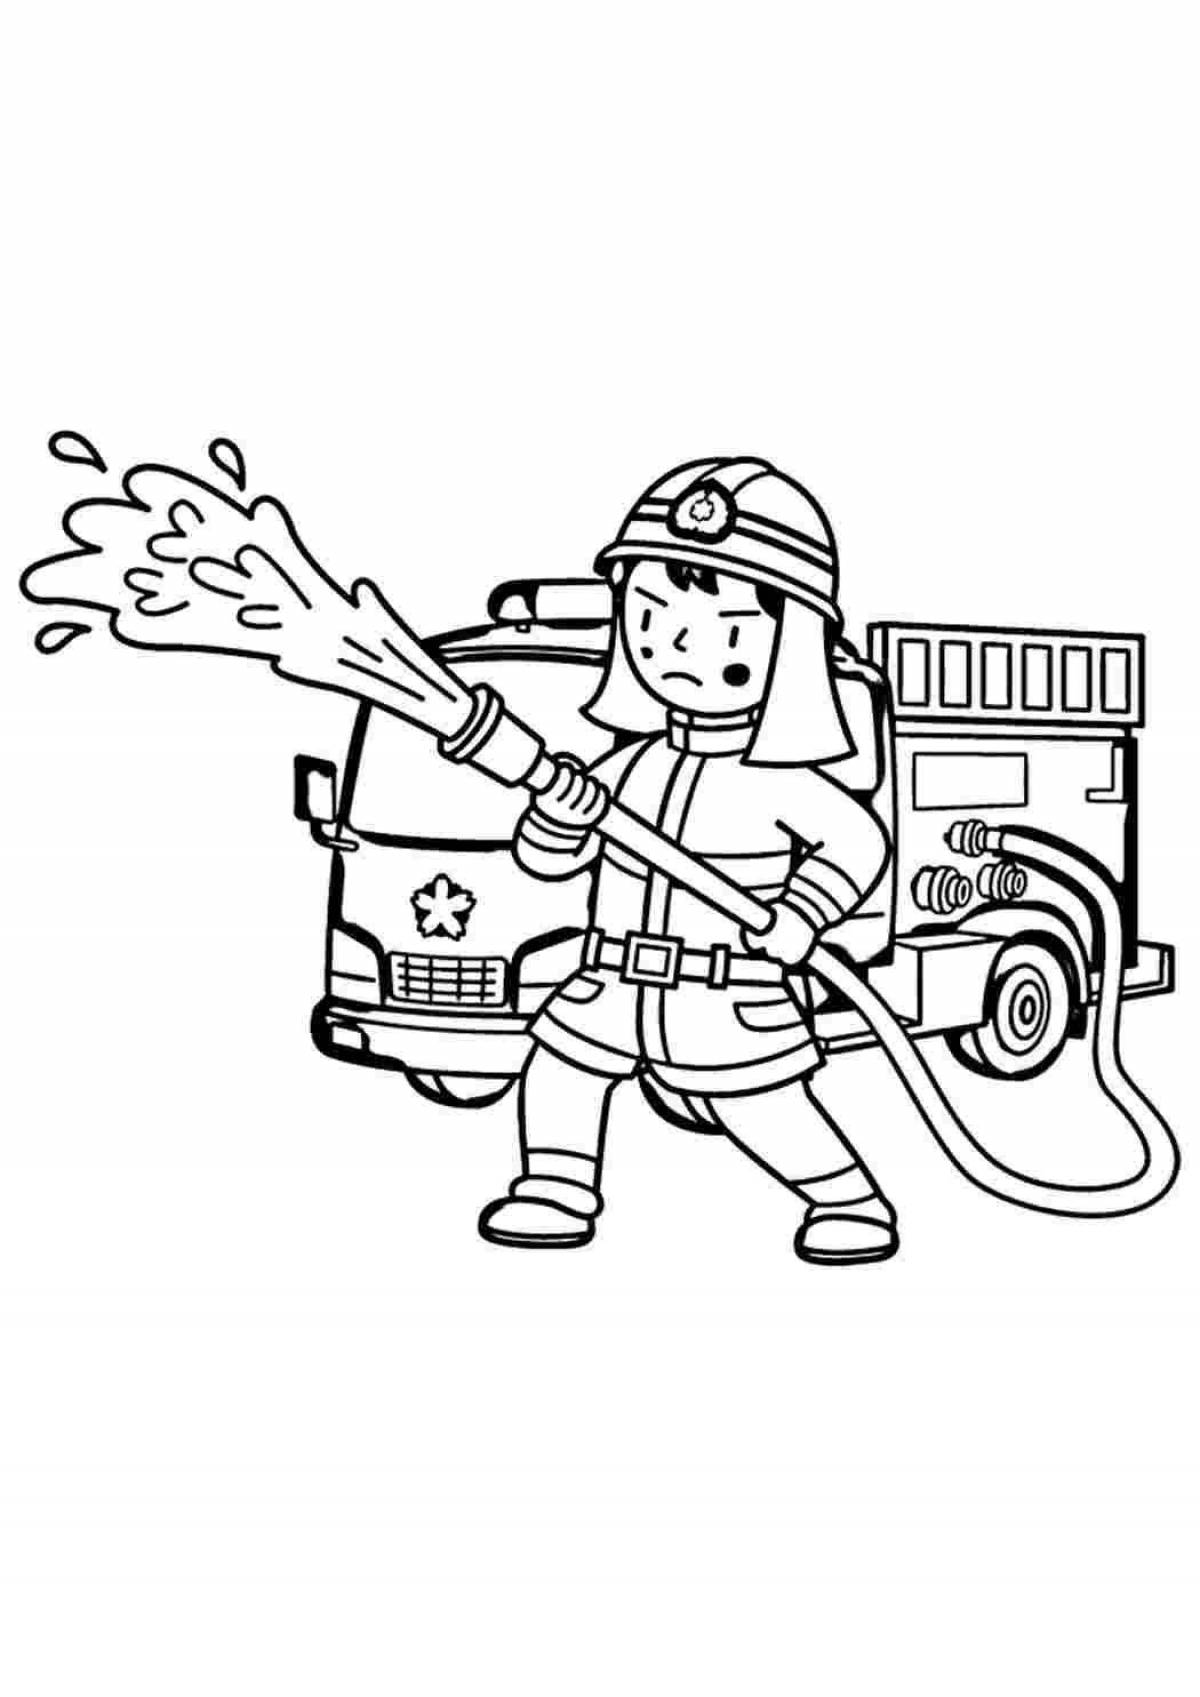 A fun drawing of a firefighter for kids